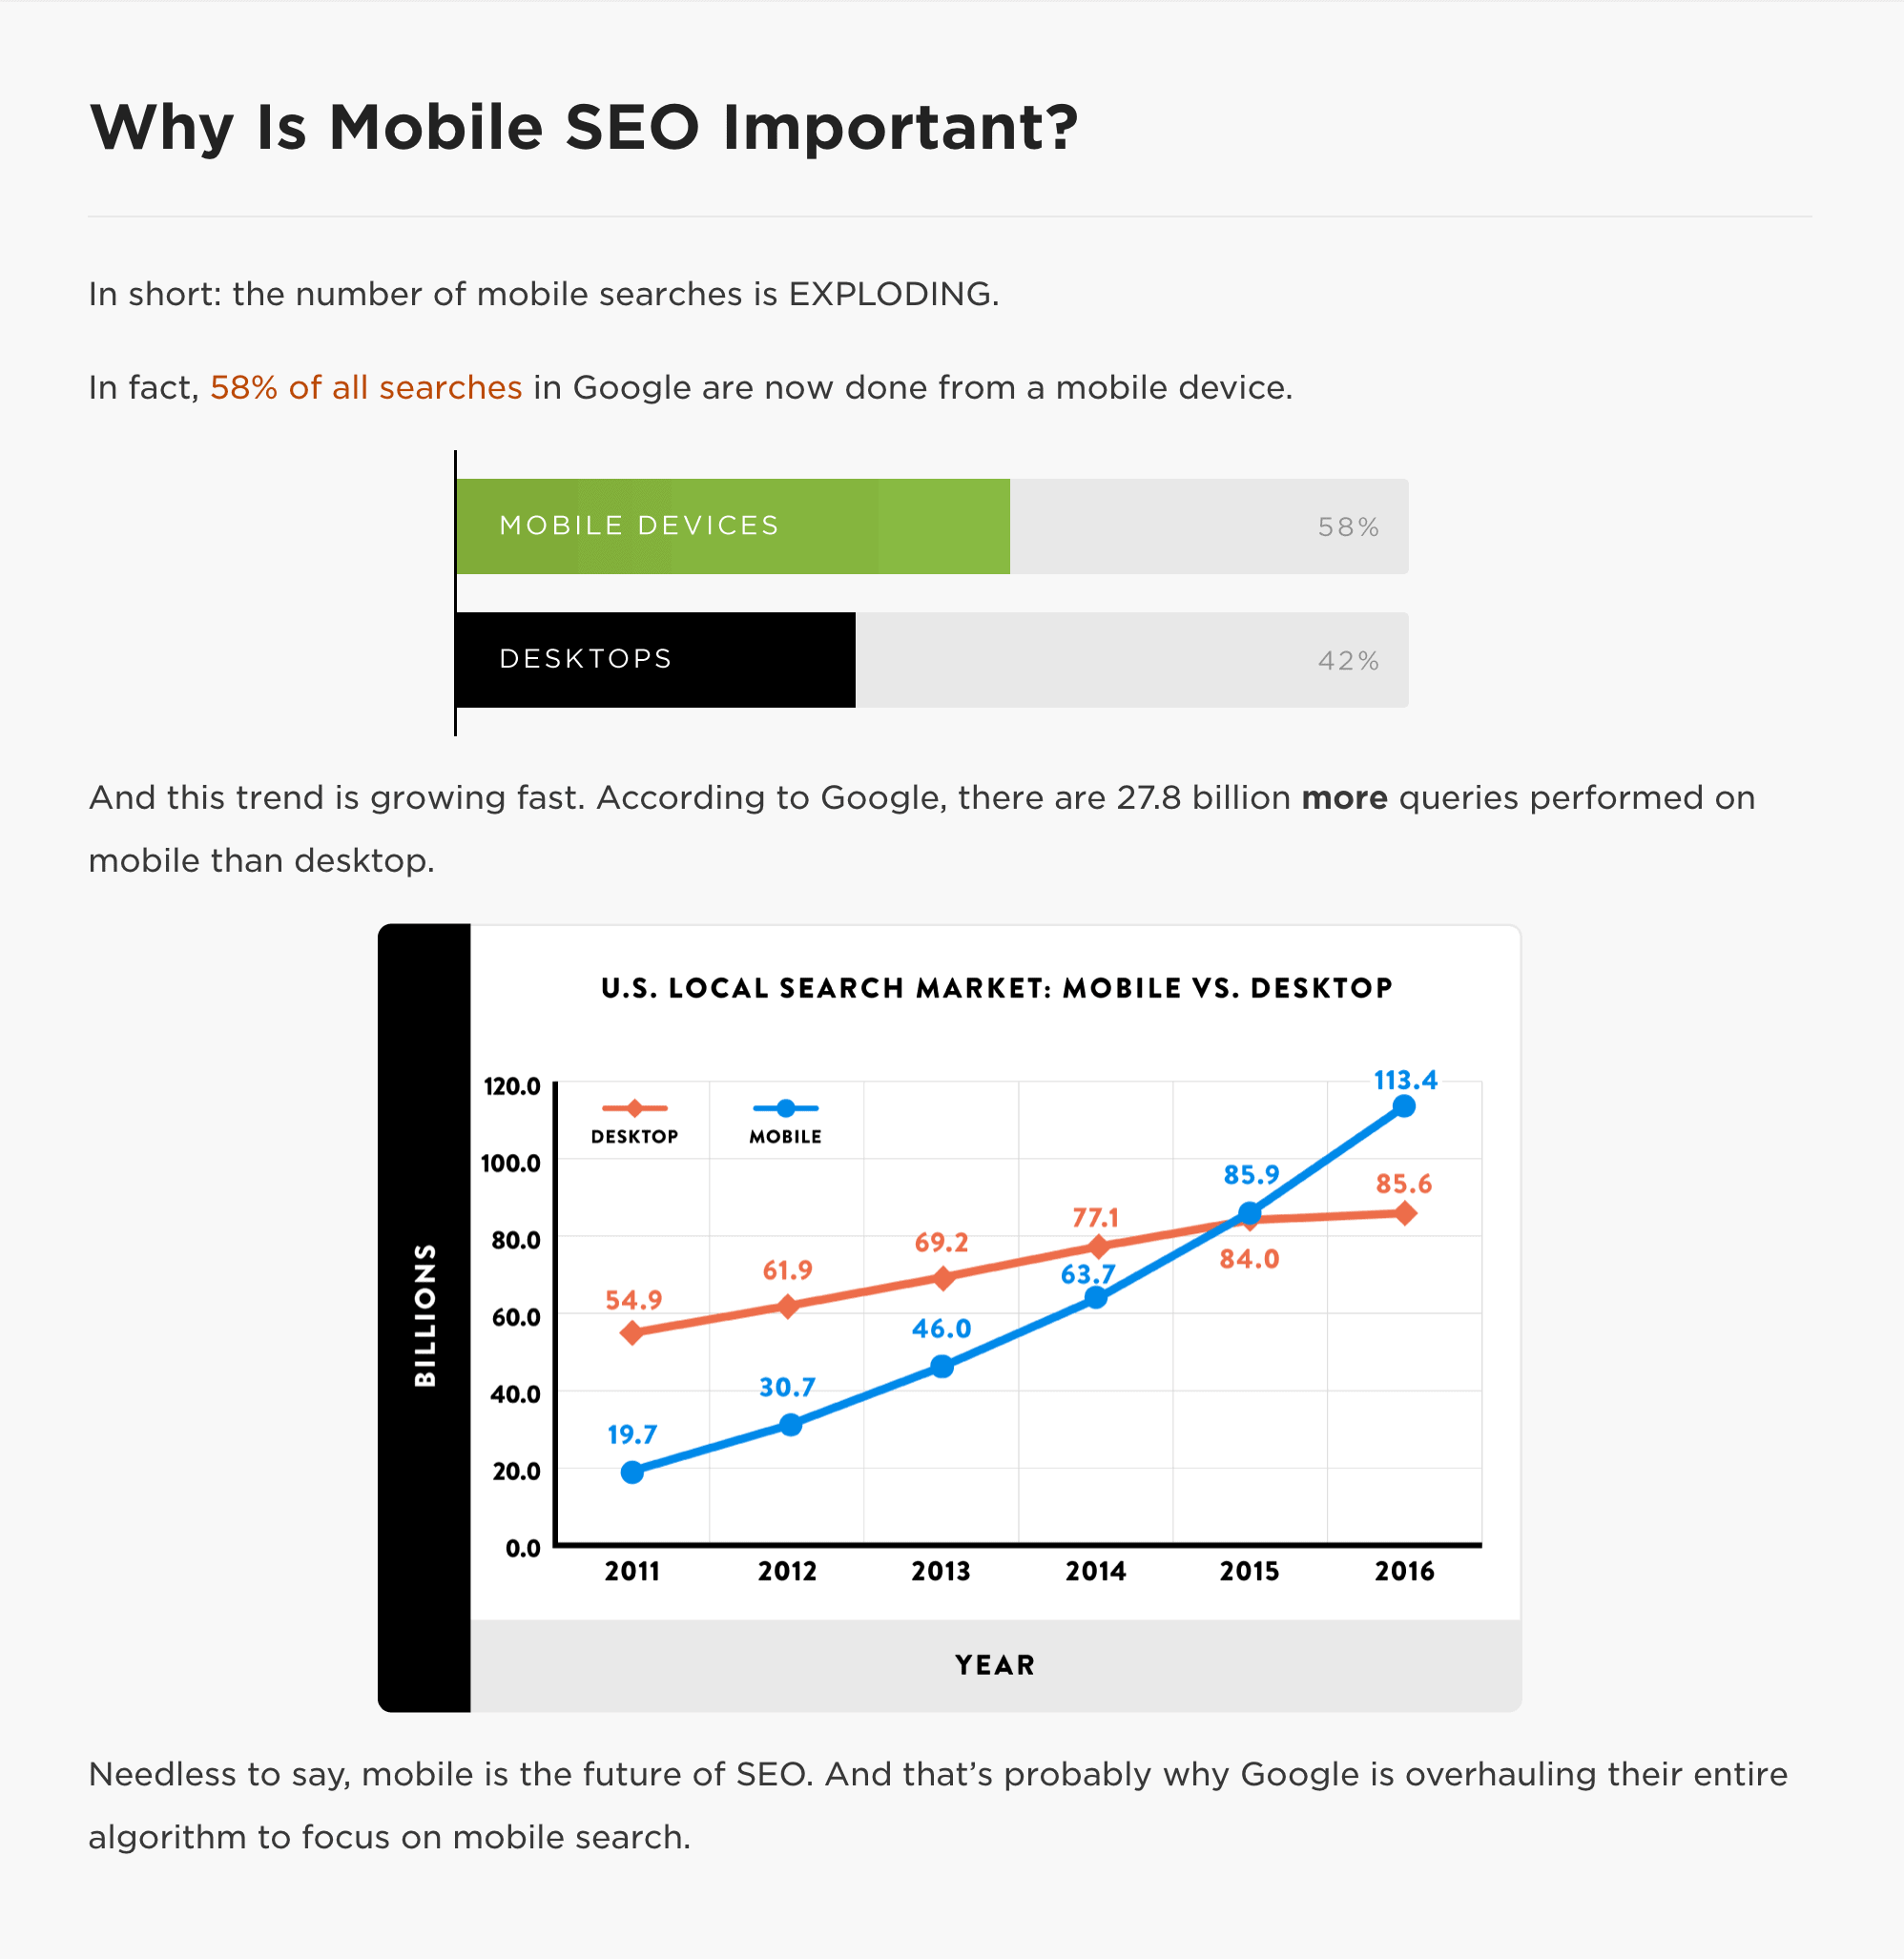 Why is Mobile SEO Important?